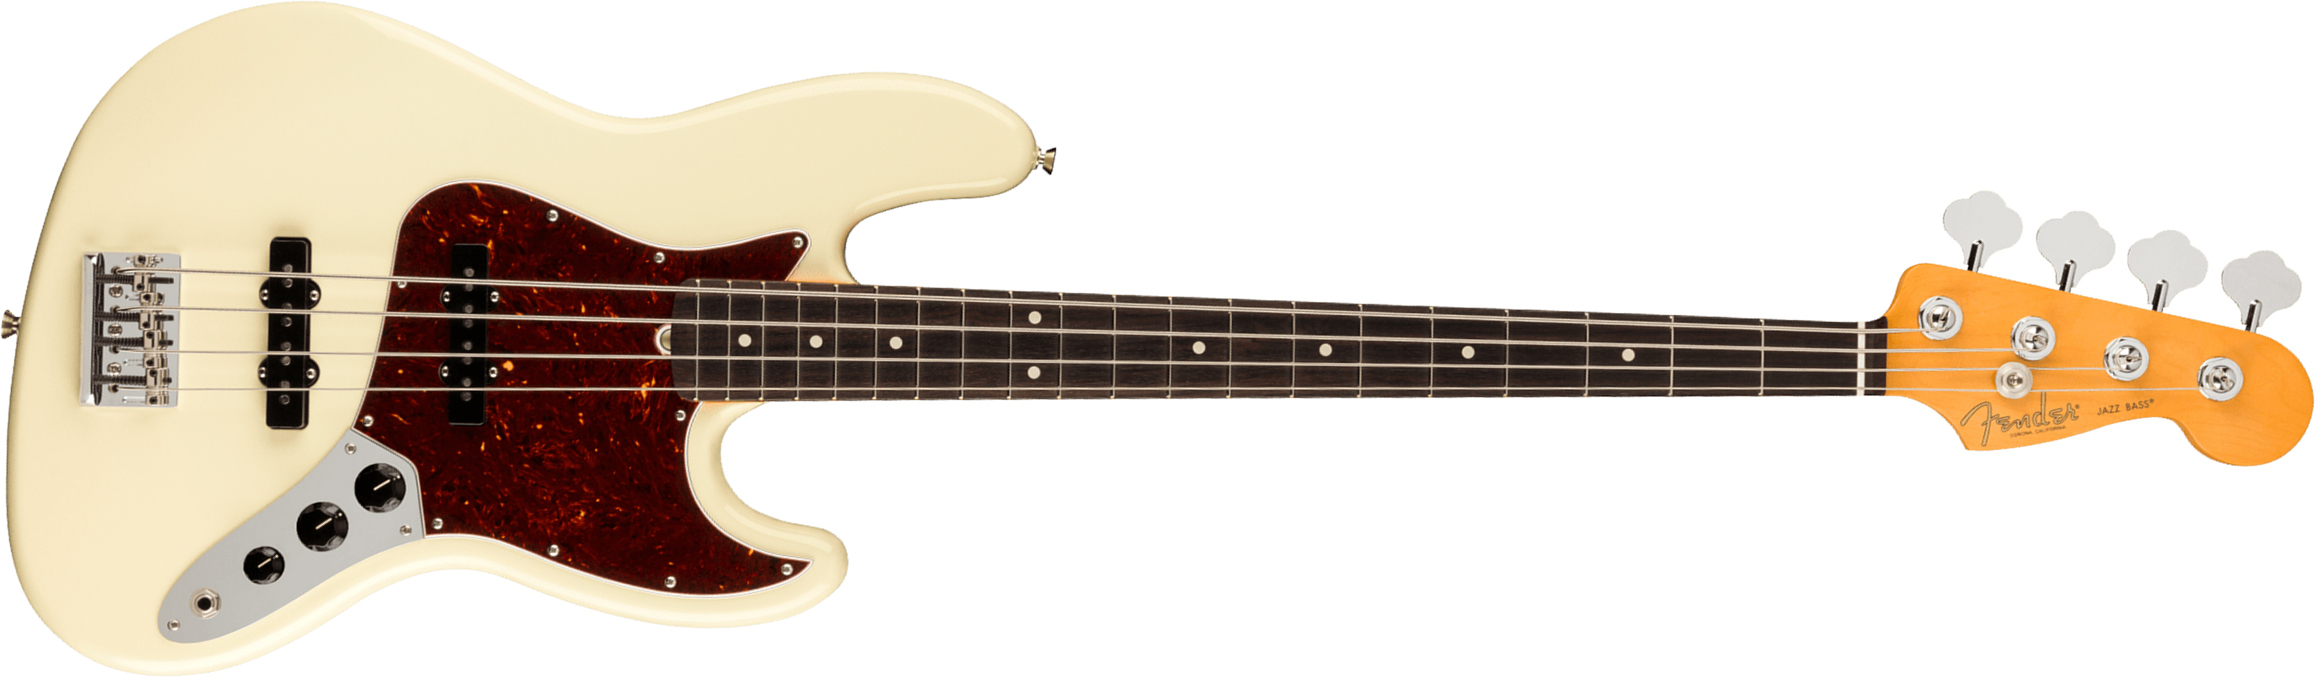 Fender Jazz Bass American Professional Ii Usa Rw - Olympic White - Solid body electric bass - Main picture